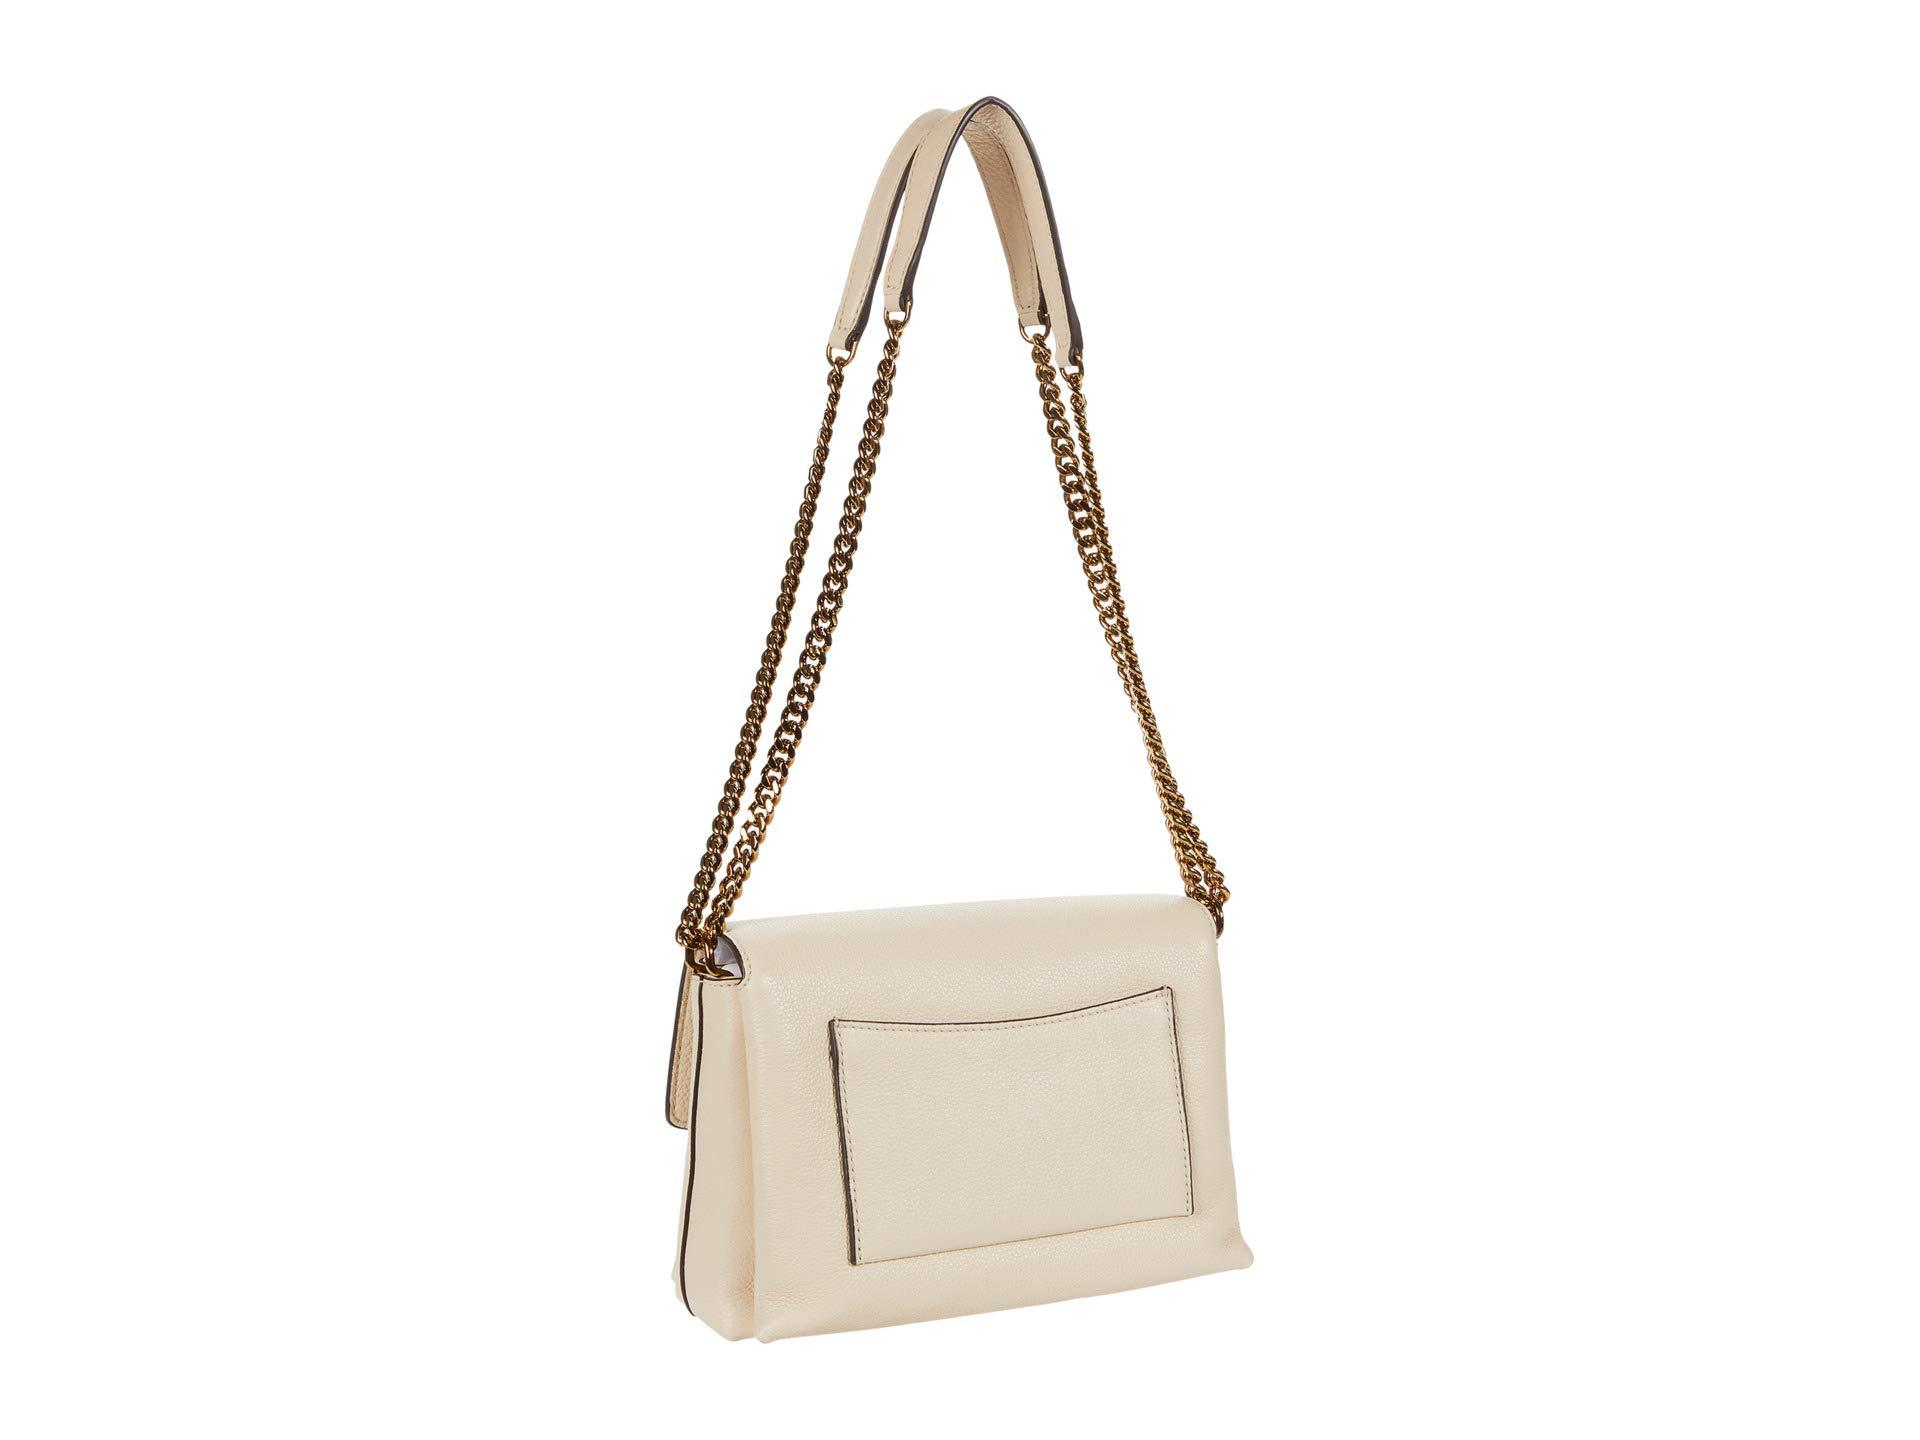 Tory Burch Leather Kira Pebbled Small Convertible Shoulder Bag in Beige ...